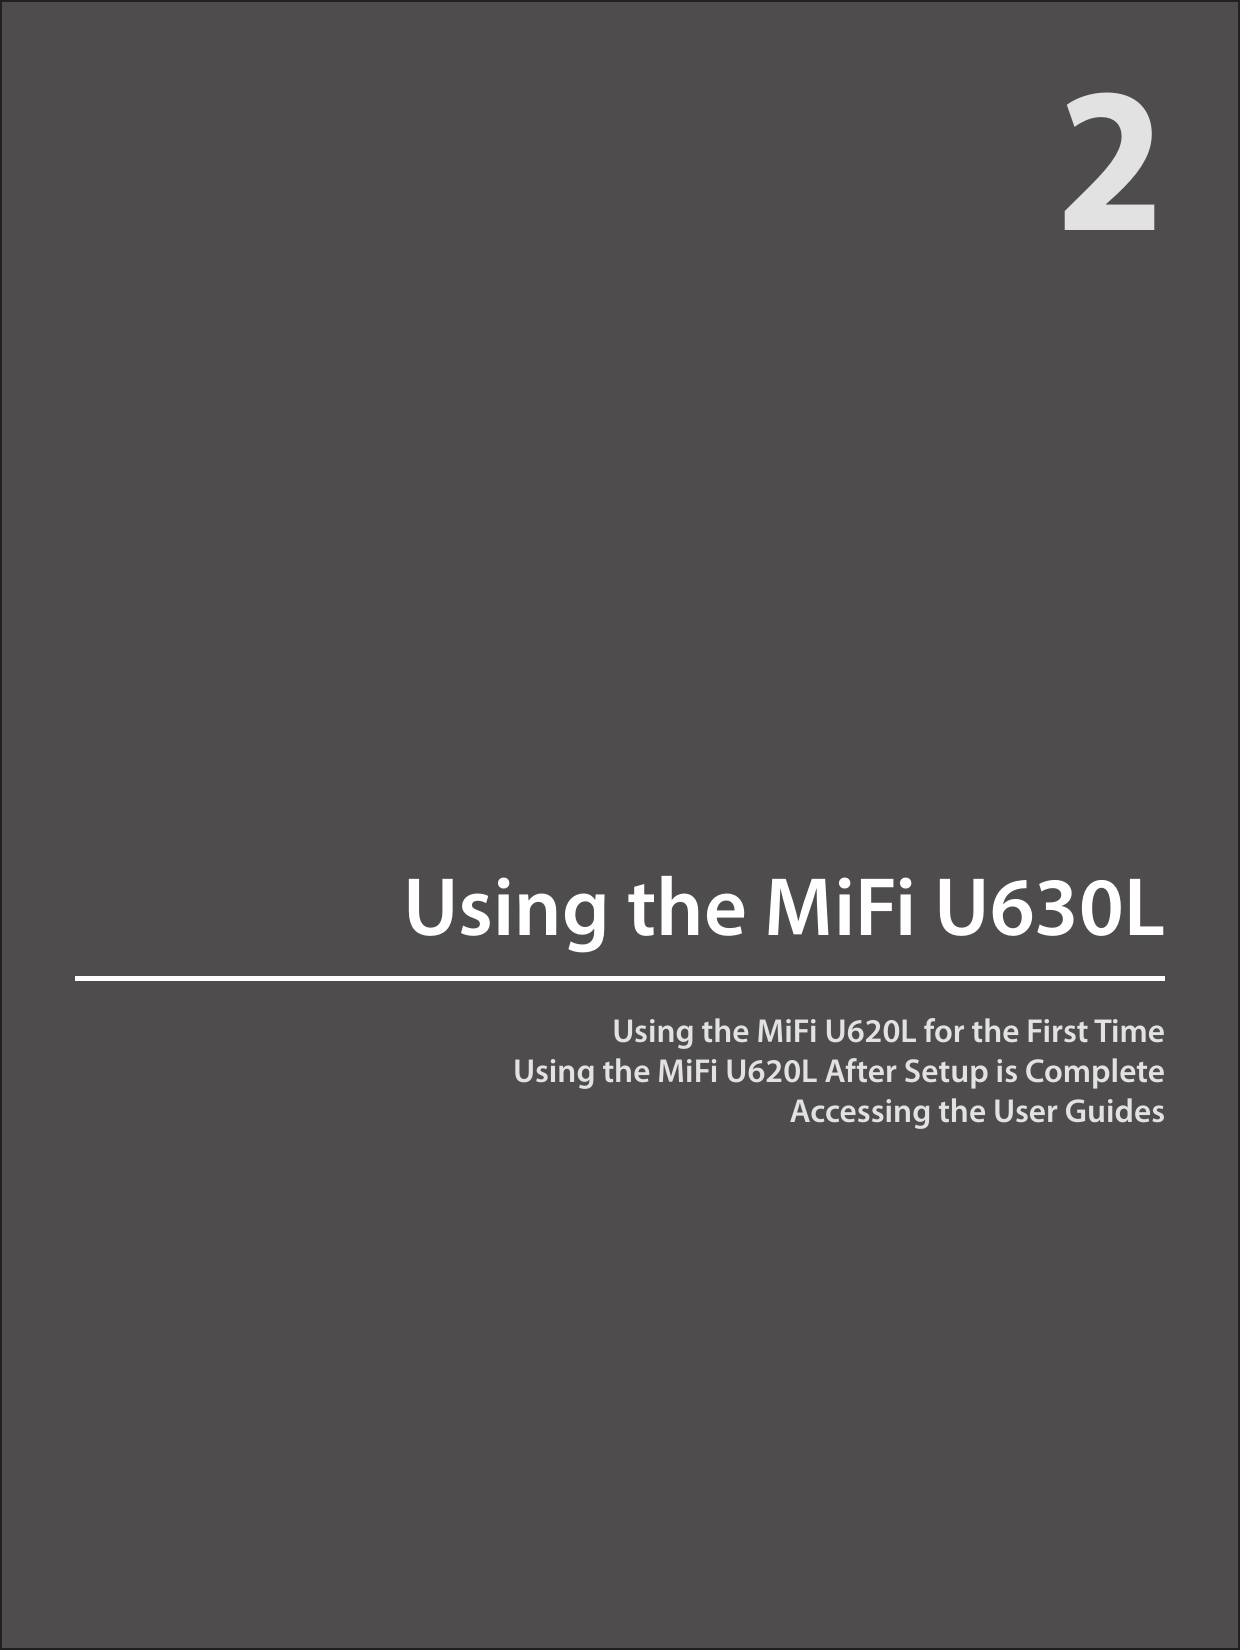 Using the MiFi U620L for the First TimeUsing the MiFi U620L After Setup is CompleteAccessing the User GuidesUsing the MiFi U630L2